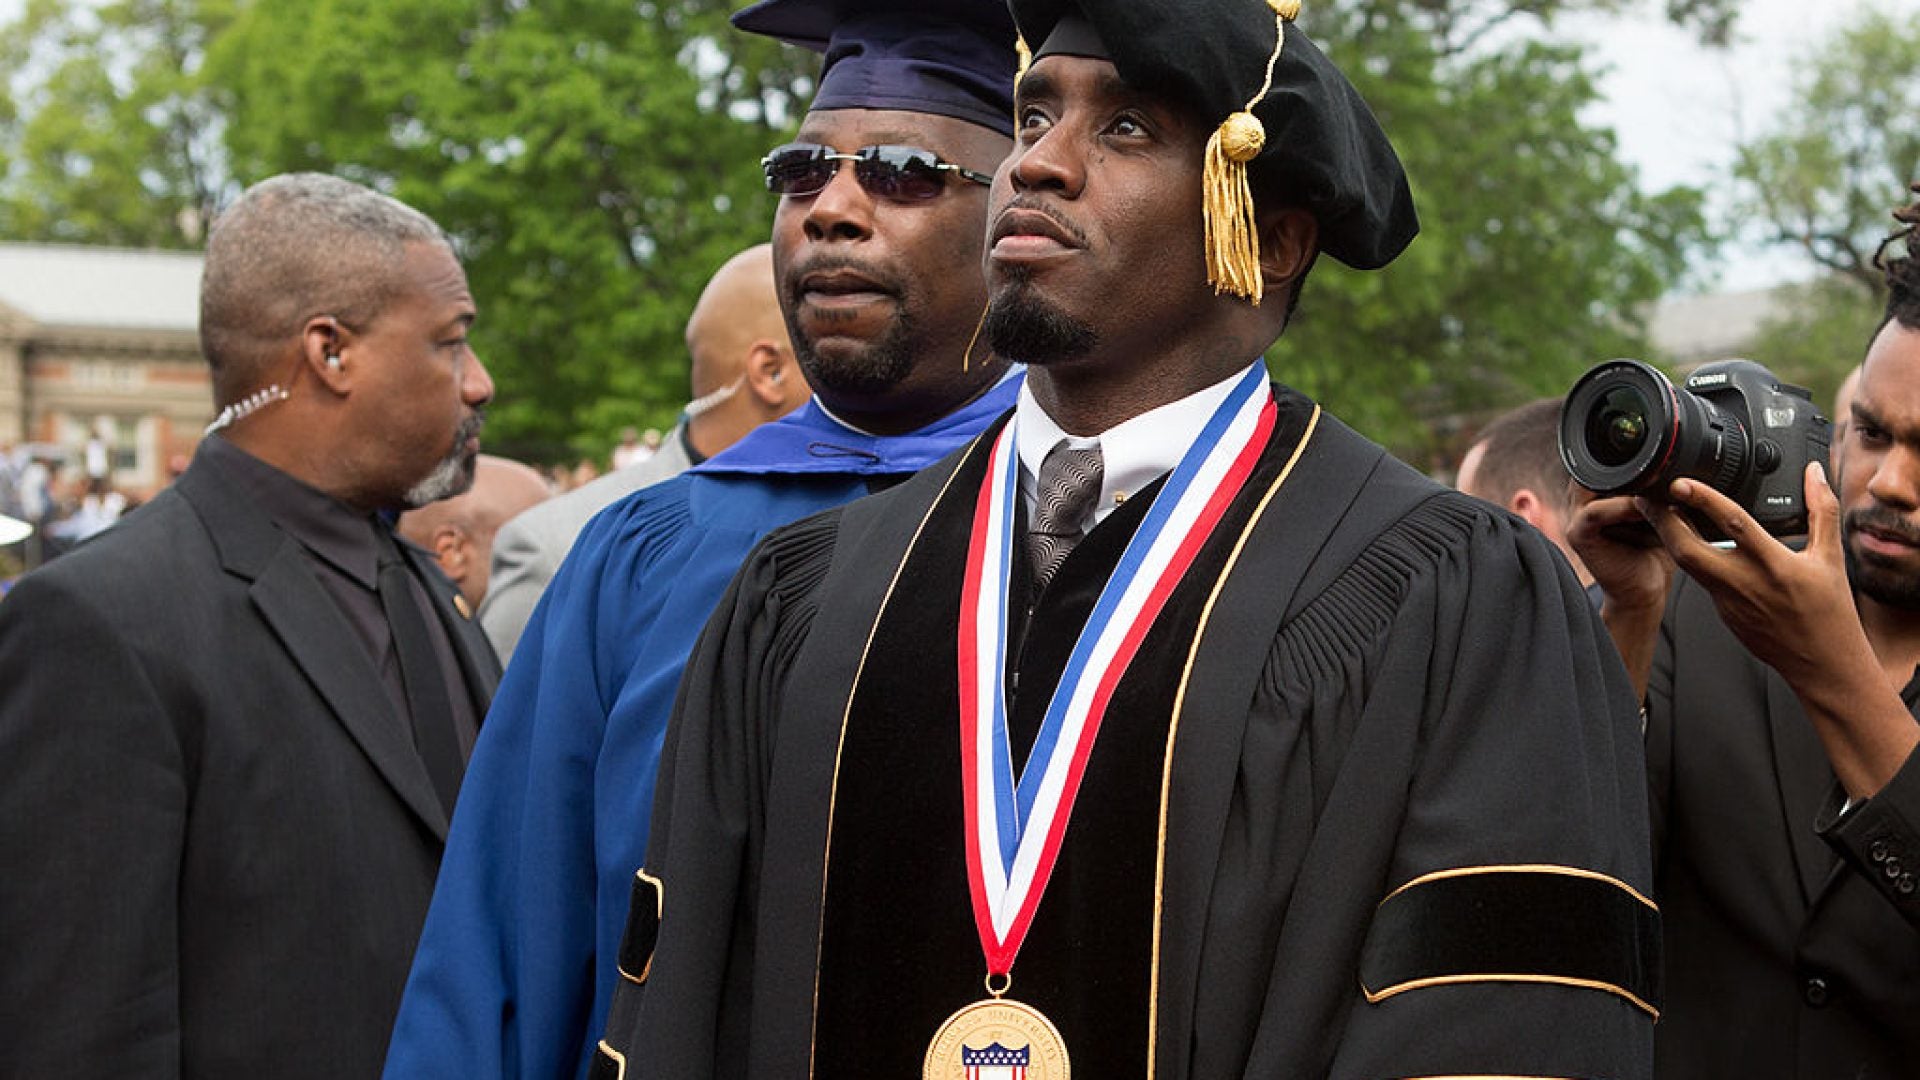 Howard University Revokes Sean "Diddy" Combs' Honorary Degree After Video Of Assault On Cassie Surfaces